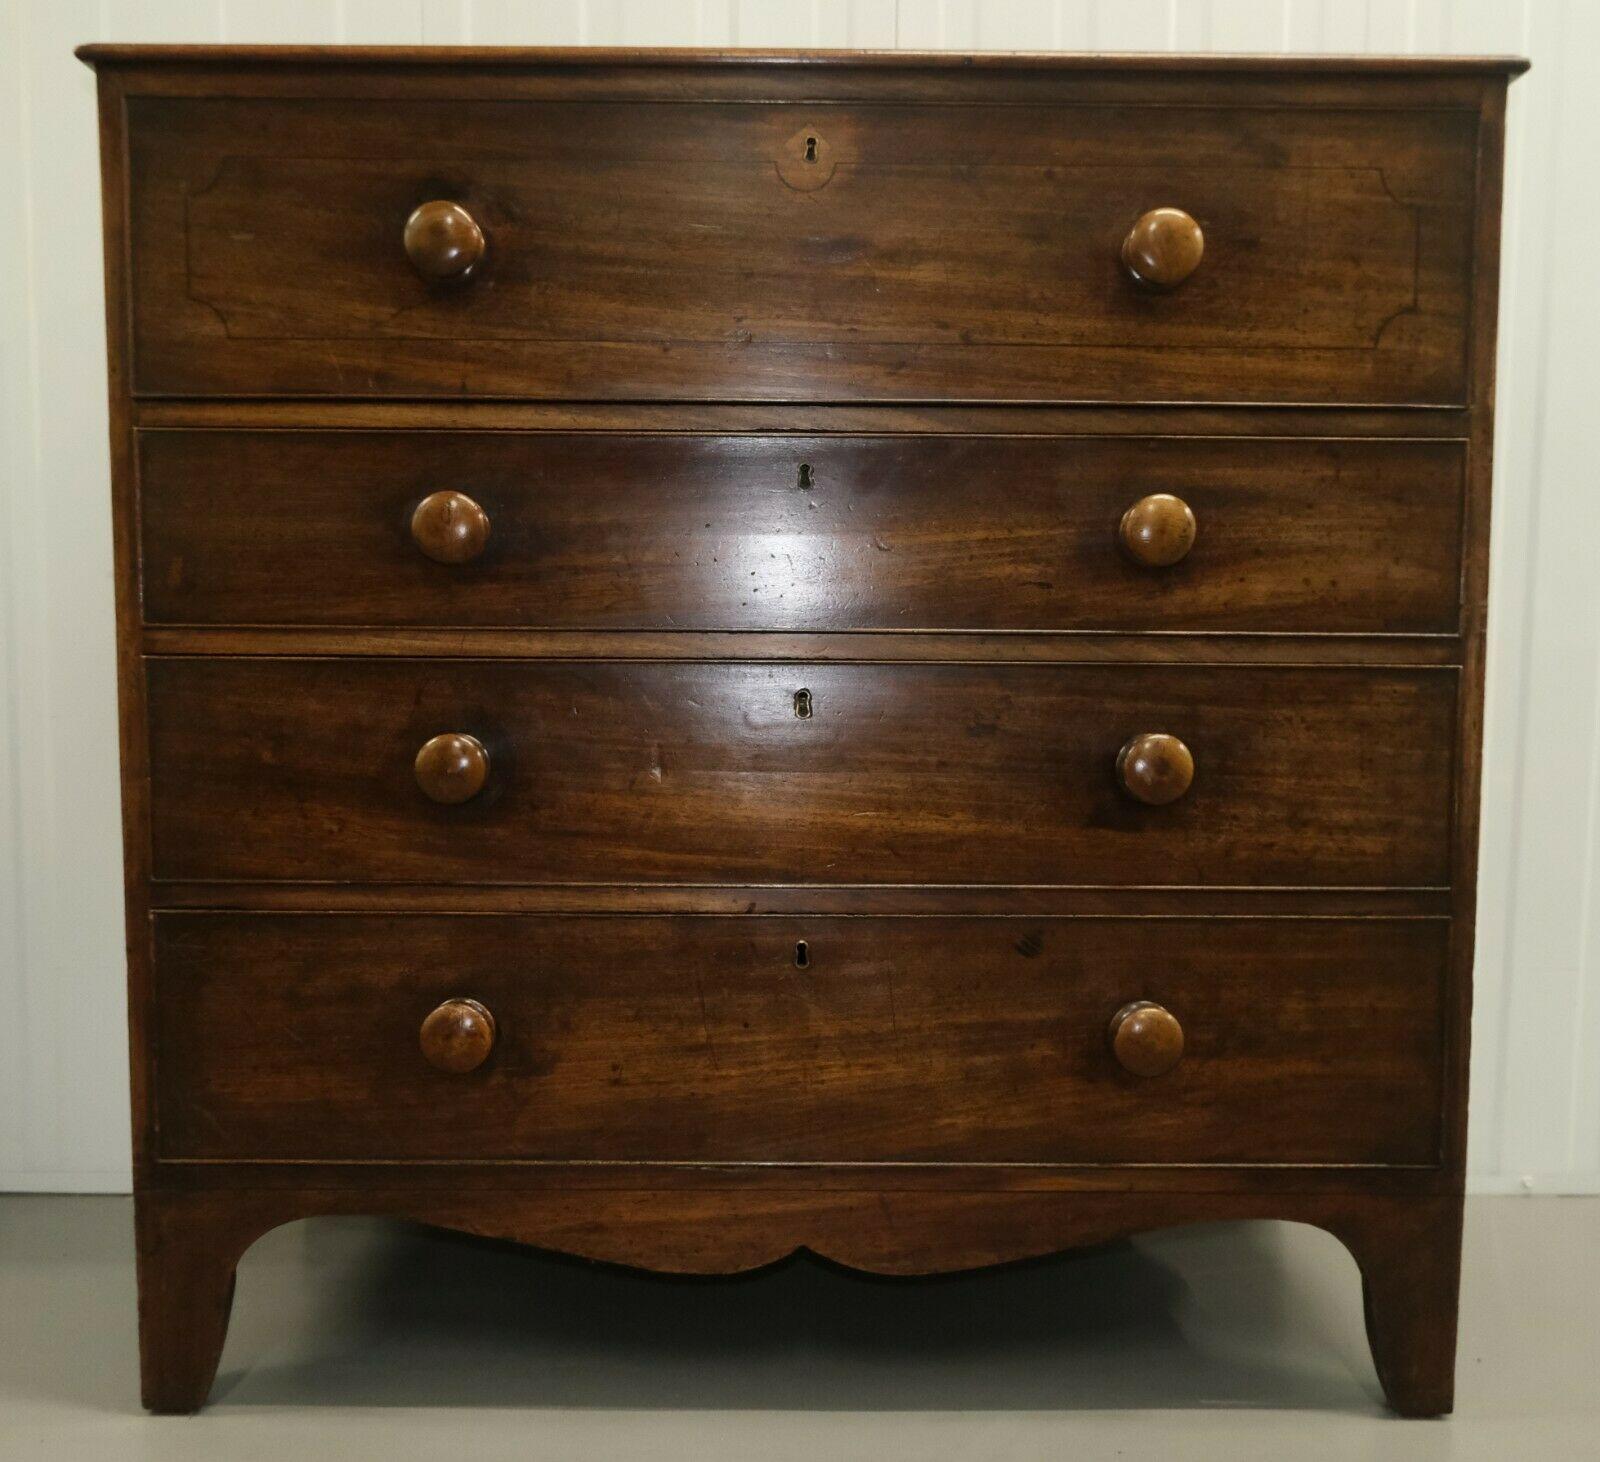 We are delighted to offer for sale this gorgeous 19th century mahogany secretaire brown chest of drawers.

Appearing as a standard chest of five drawers, fold down the top to reveal a fitted bureau with seven small drawers and pigeon holes. The